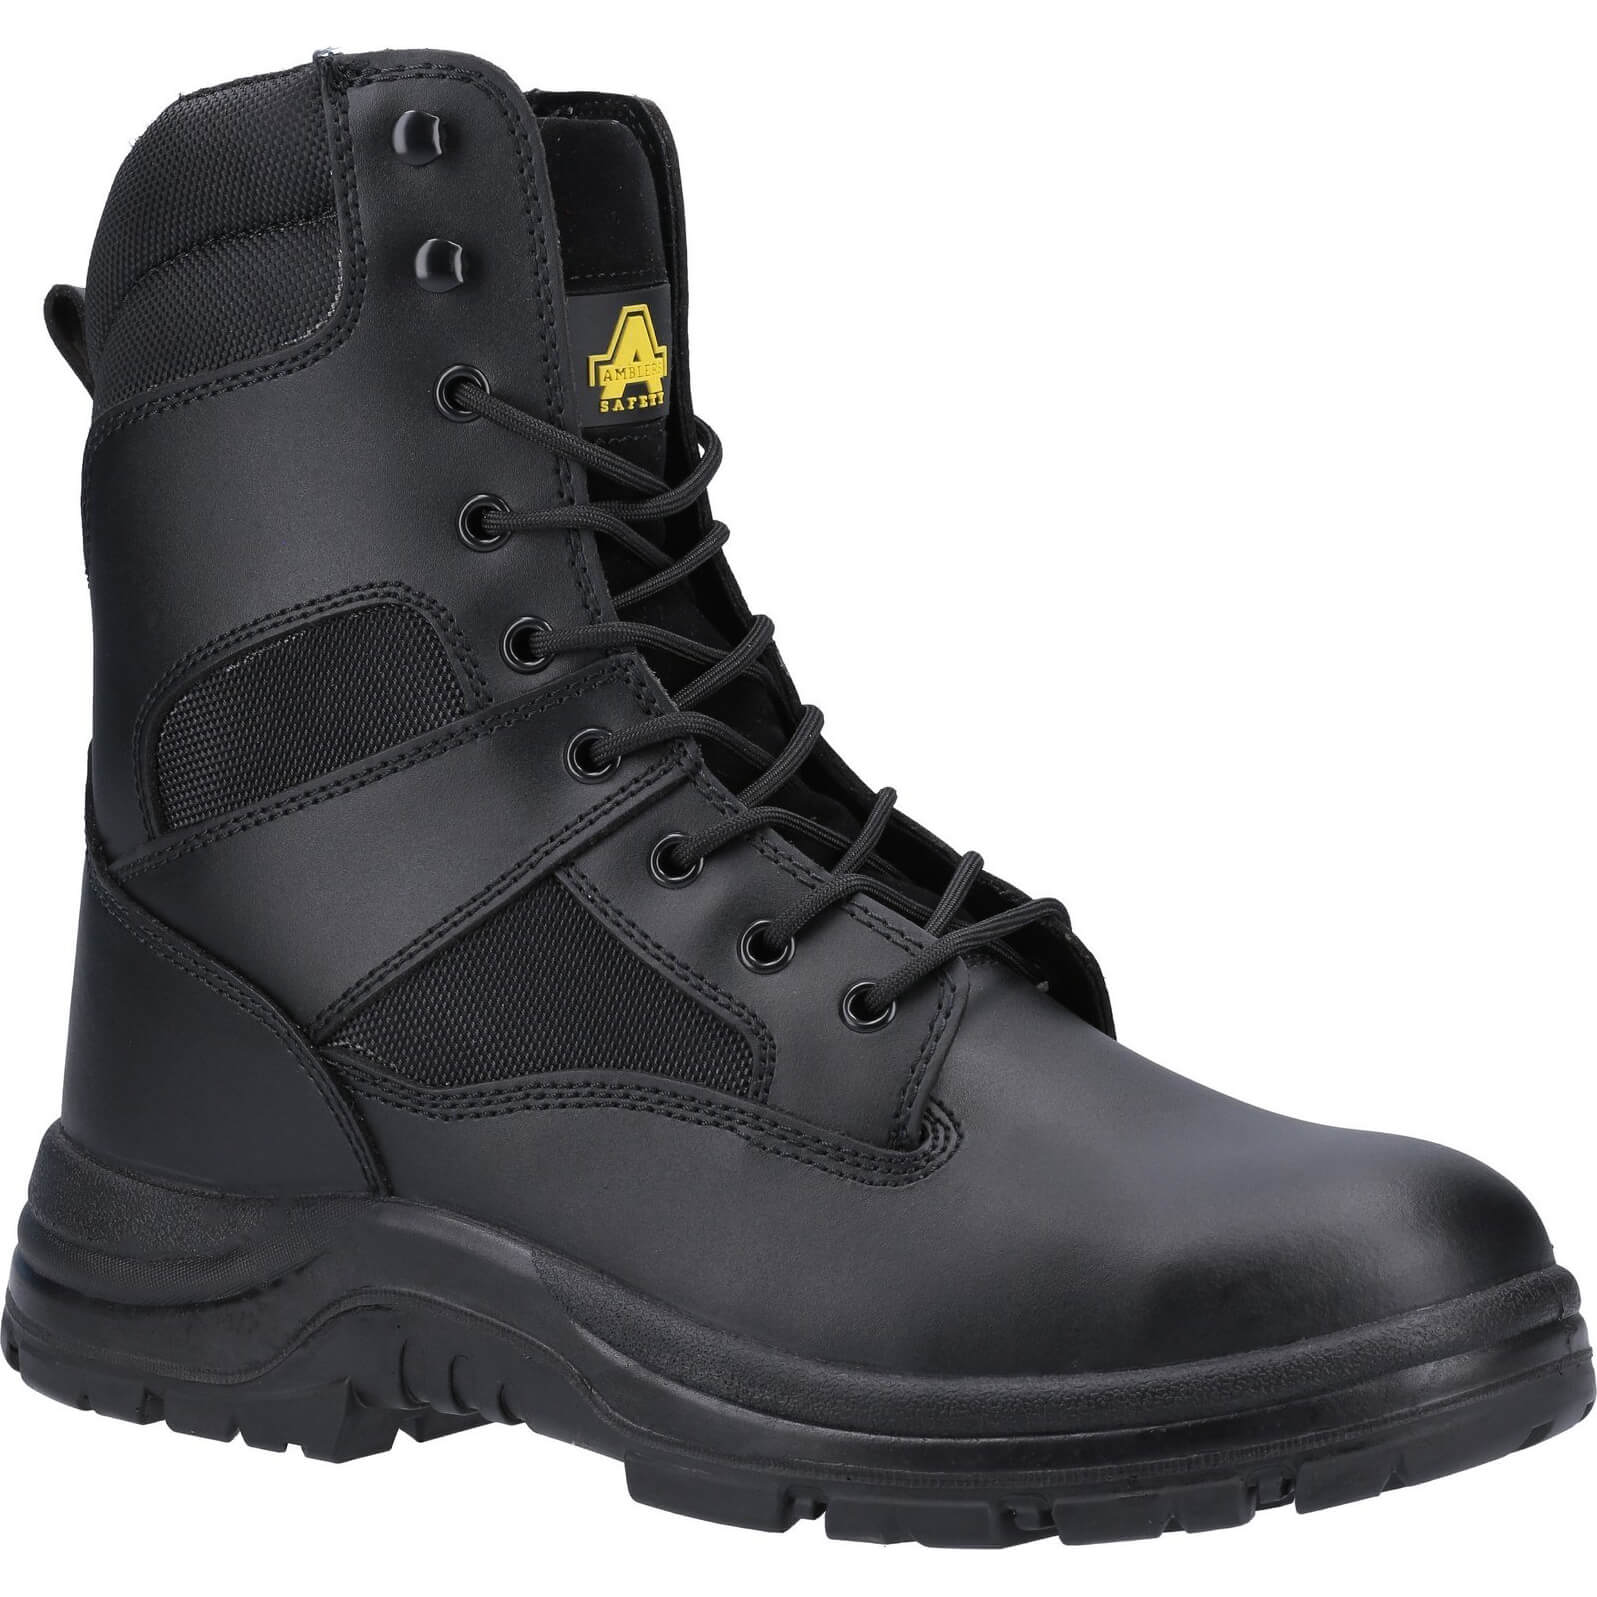 Photo of Amblers Mens Safety Fs008 Water Resistant Hi Leg Safety Boots Black Size 12